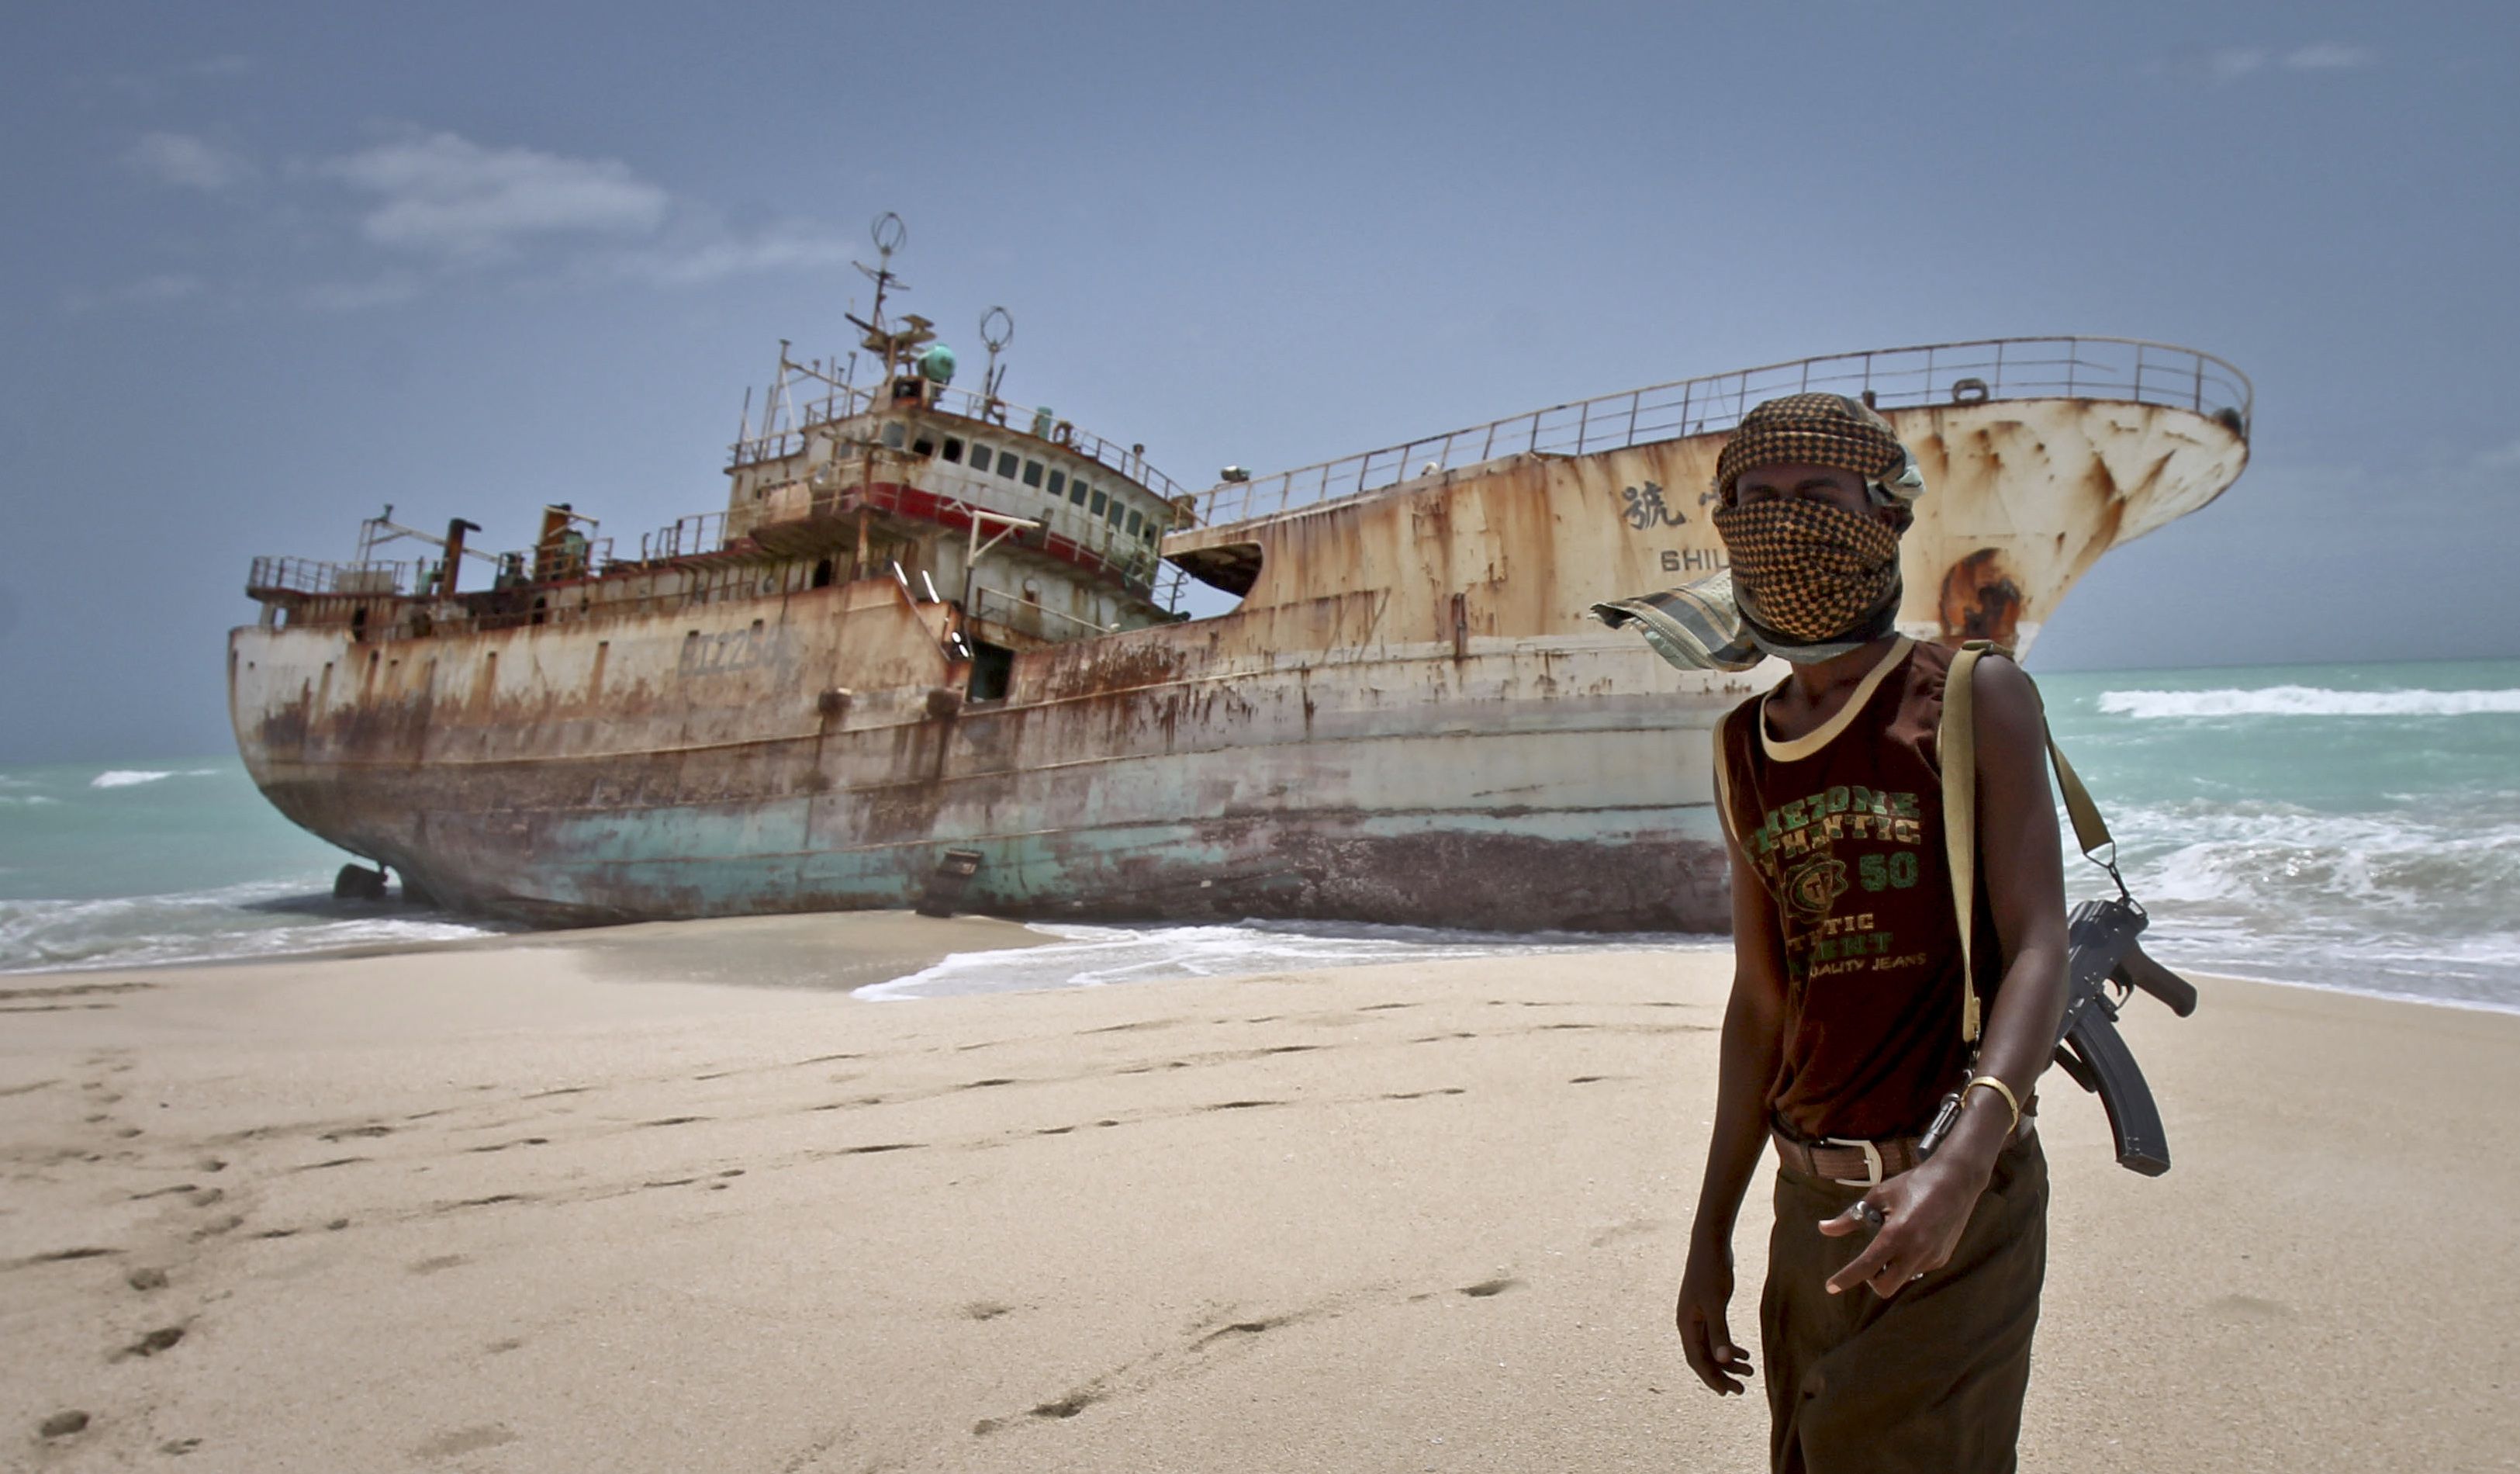 Somalia pirates fight for free dissemination of information on the web